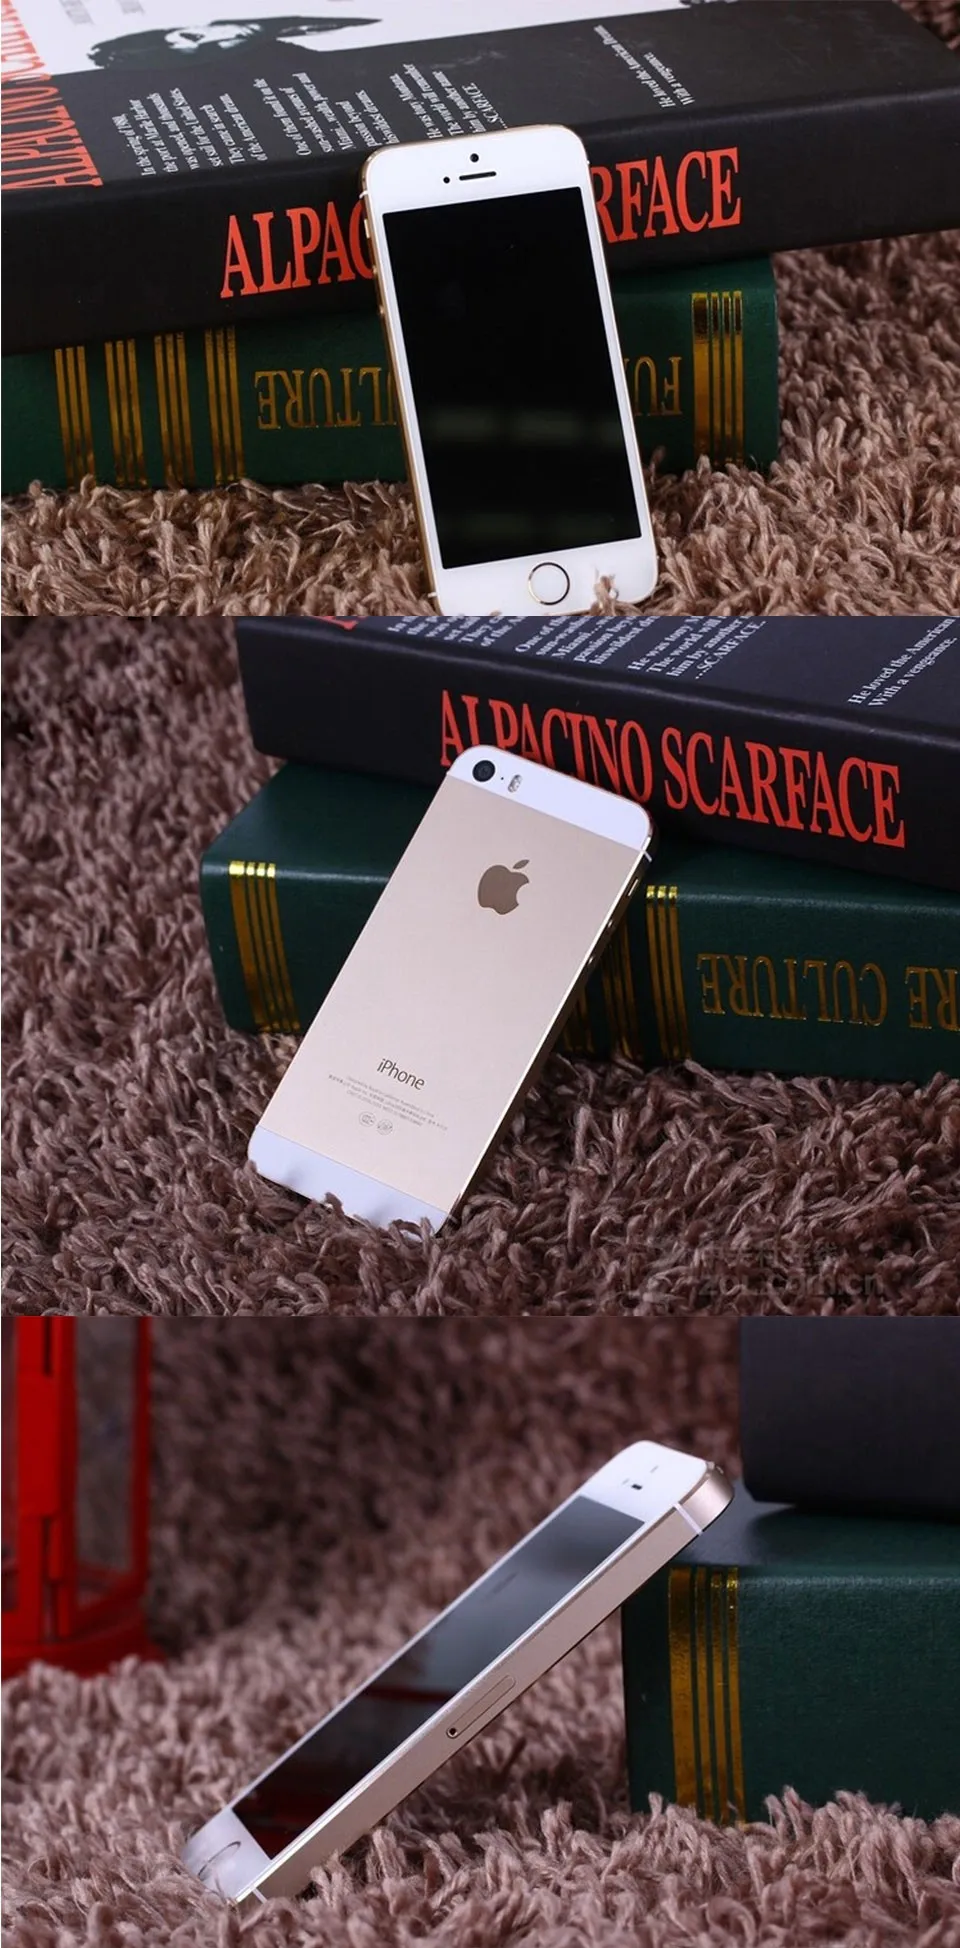 new apple cell phone Apple iPhone 5S Original Cell Phones Dual Core 4" IPS Used Phone 8MP 1080P Smartphone GPS IOS iPhone5s Unlocked Mobile Phone free apple cell phones